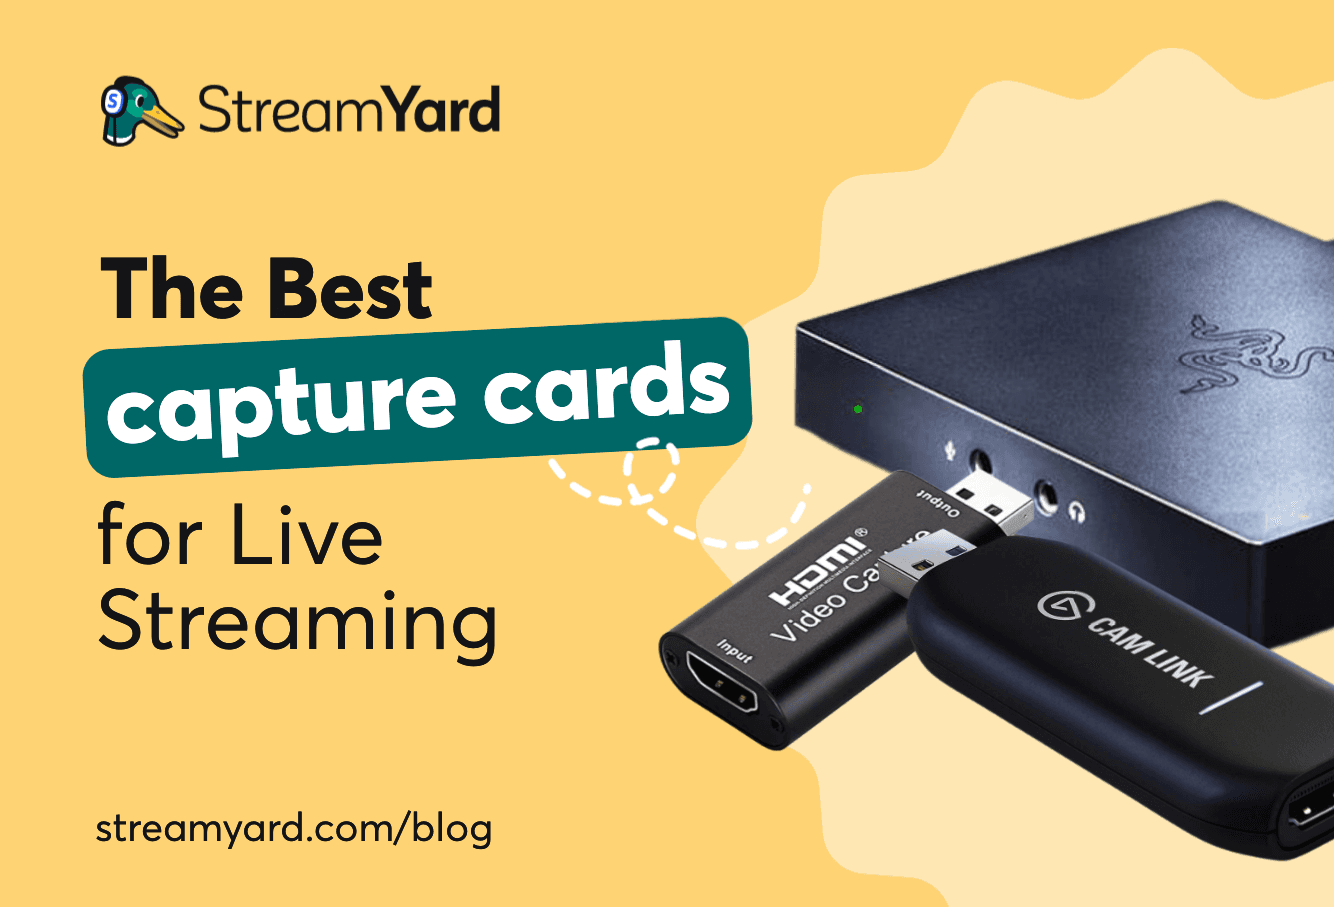 Here’s a comprehensive guide to help you choose the best capture cards for live streaming, along with the top 12 picks recommended by the pros.